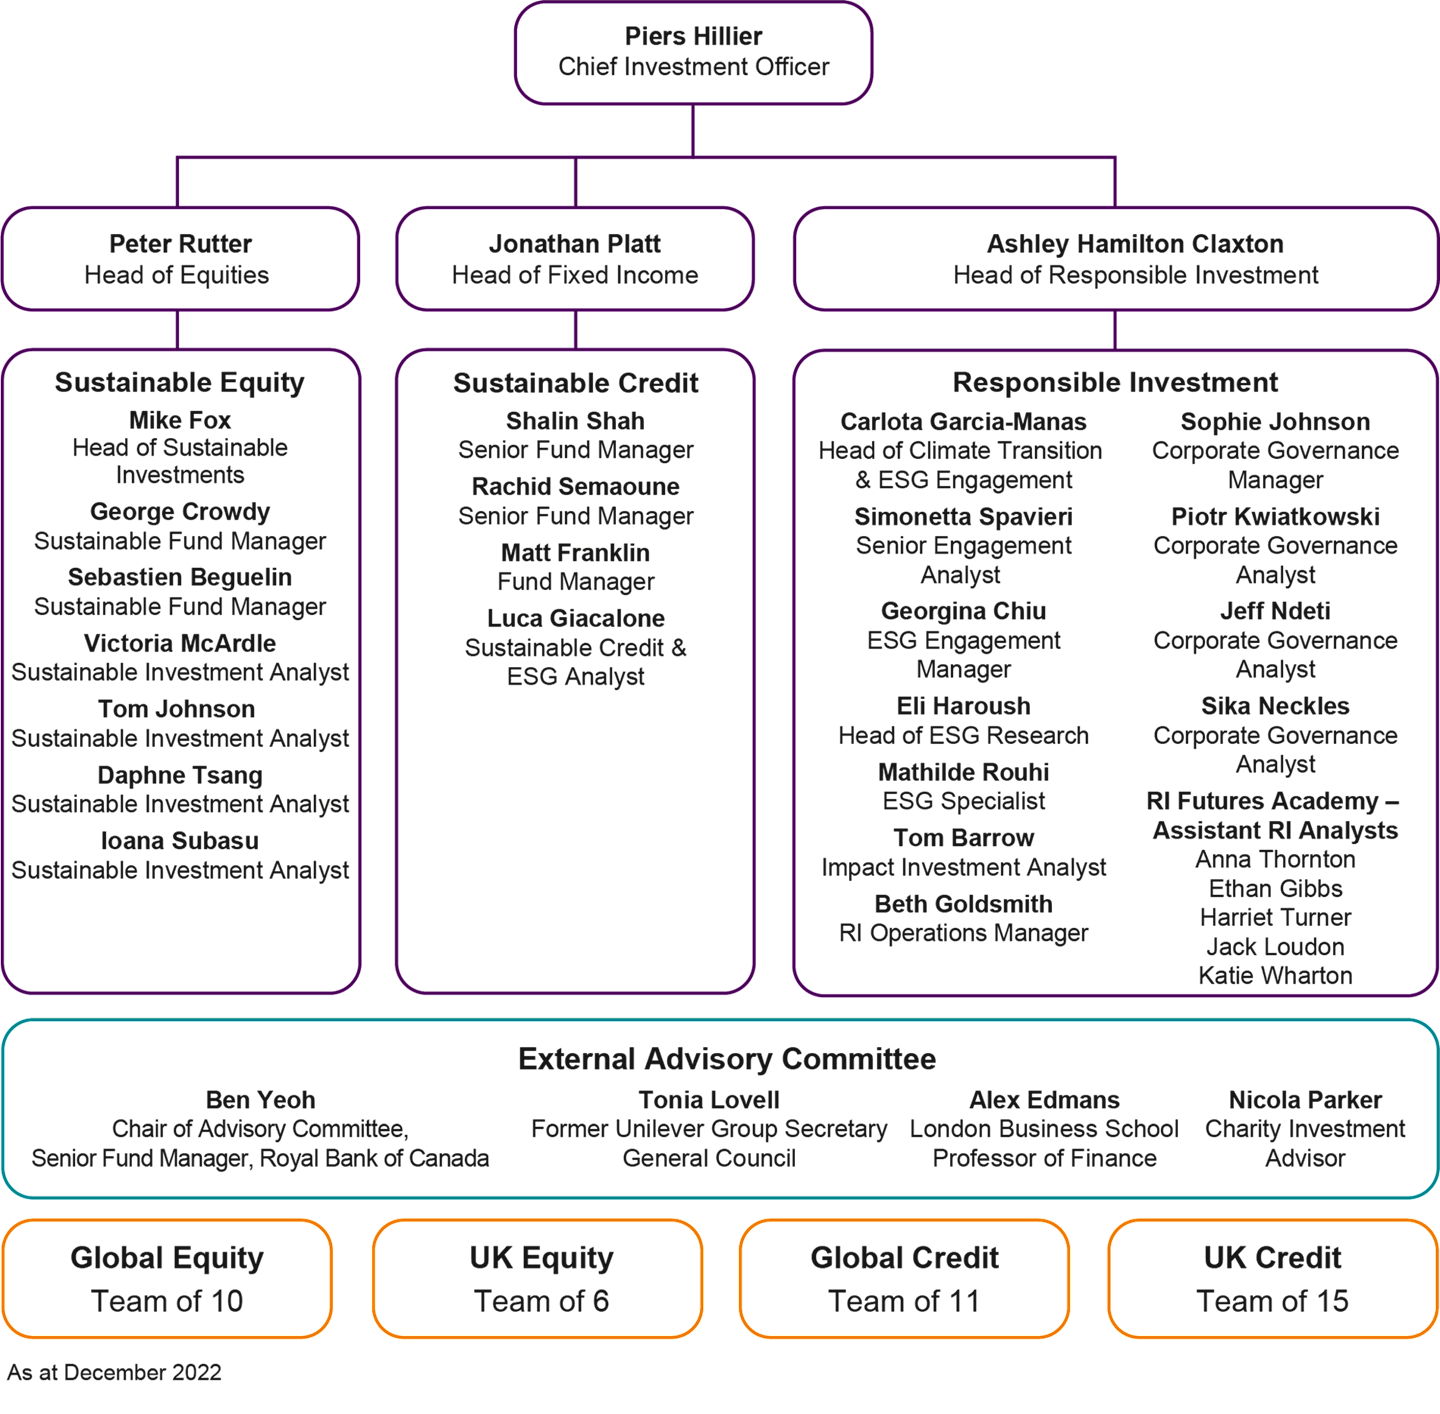 Image shows the structure of the RLAM sustainable and responsible investment teams